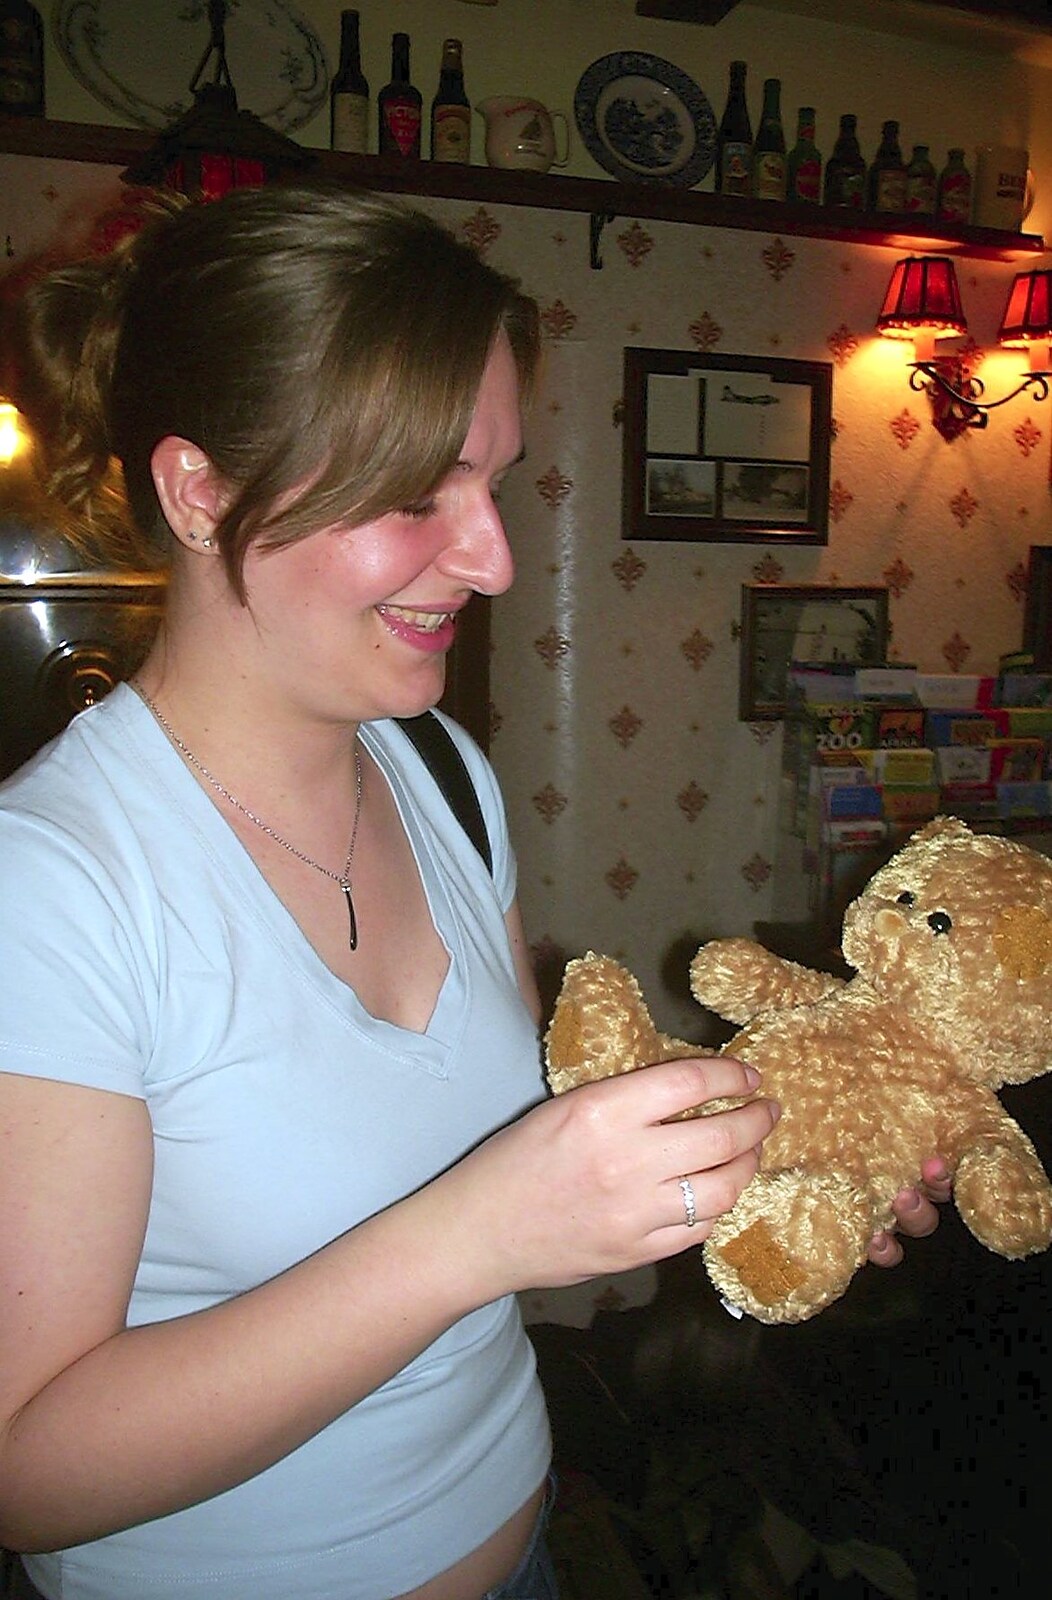 Jess checks out a teddy bear from Wednesday and Thursday: The BSCC Season Opens, and Stuff Happens, Suffolk - 9th April 2004